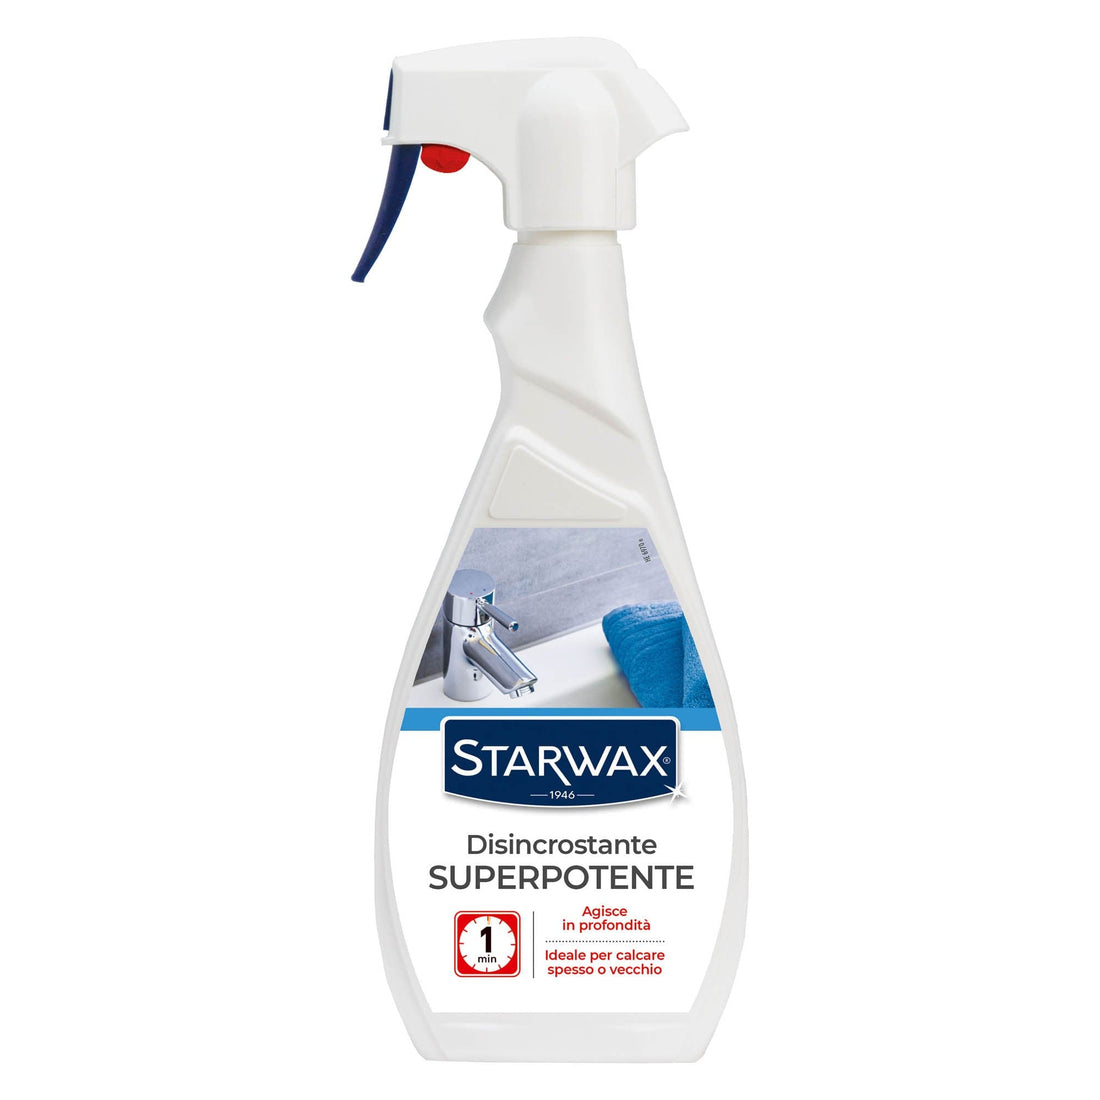 ULTRA-POWERFUL ANTI-SCALE CLEANER FOR BATHROOM STARWAX 500ML - best price from Maltashopper.com BR470510097